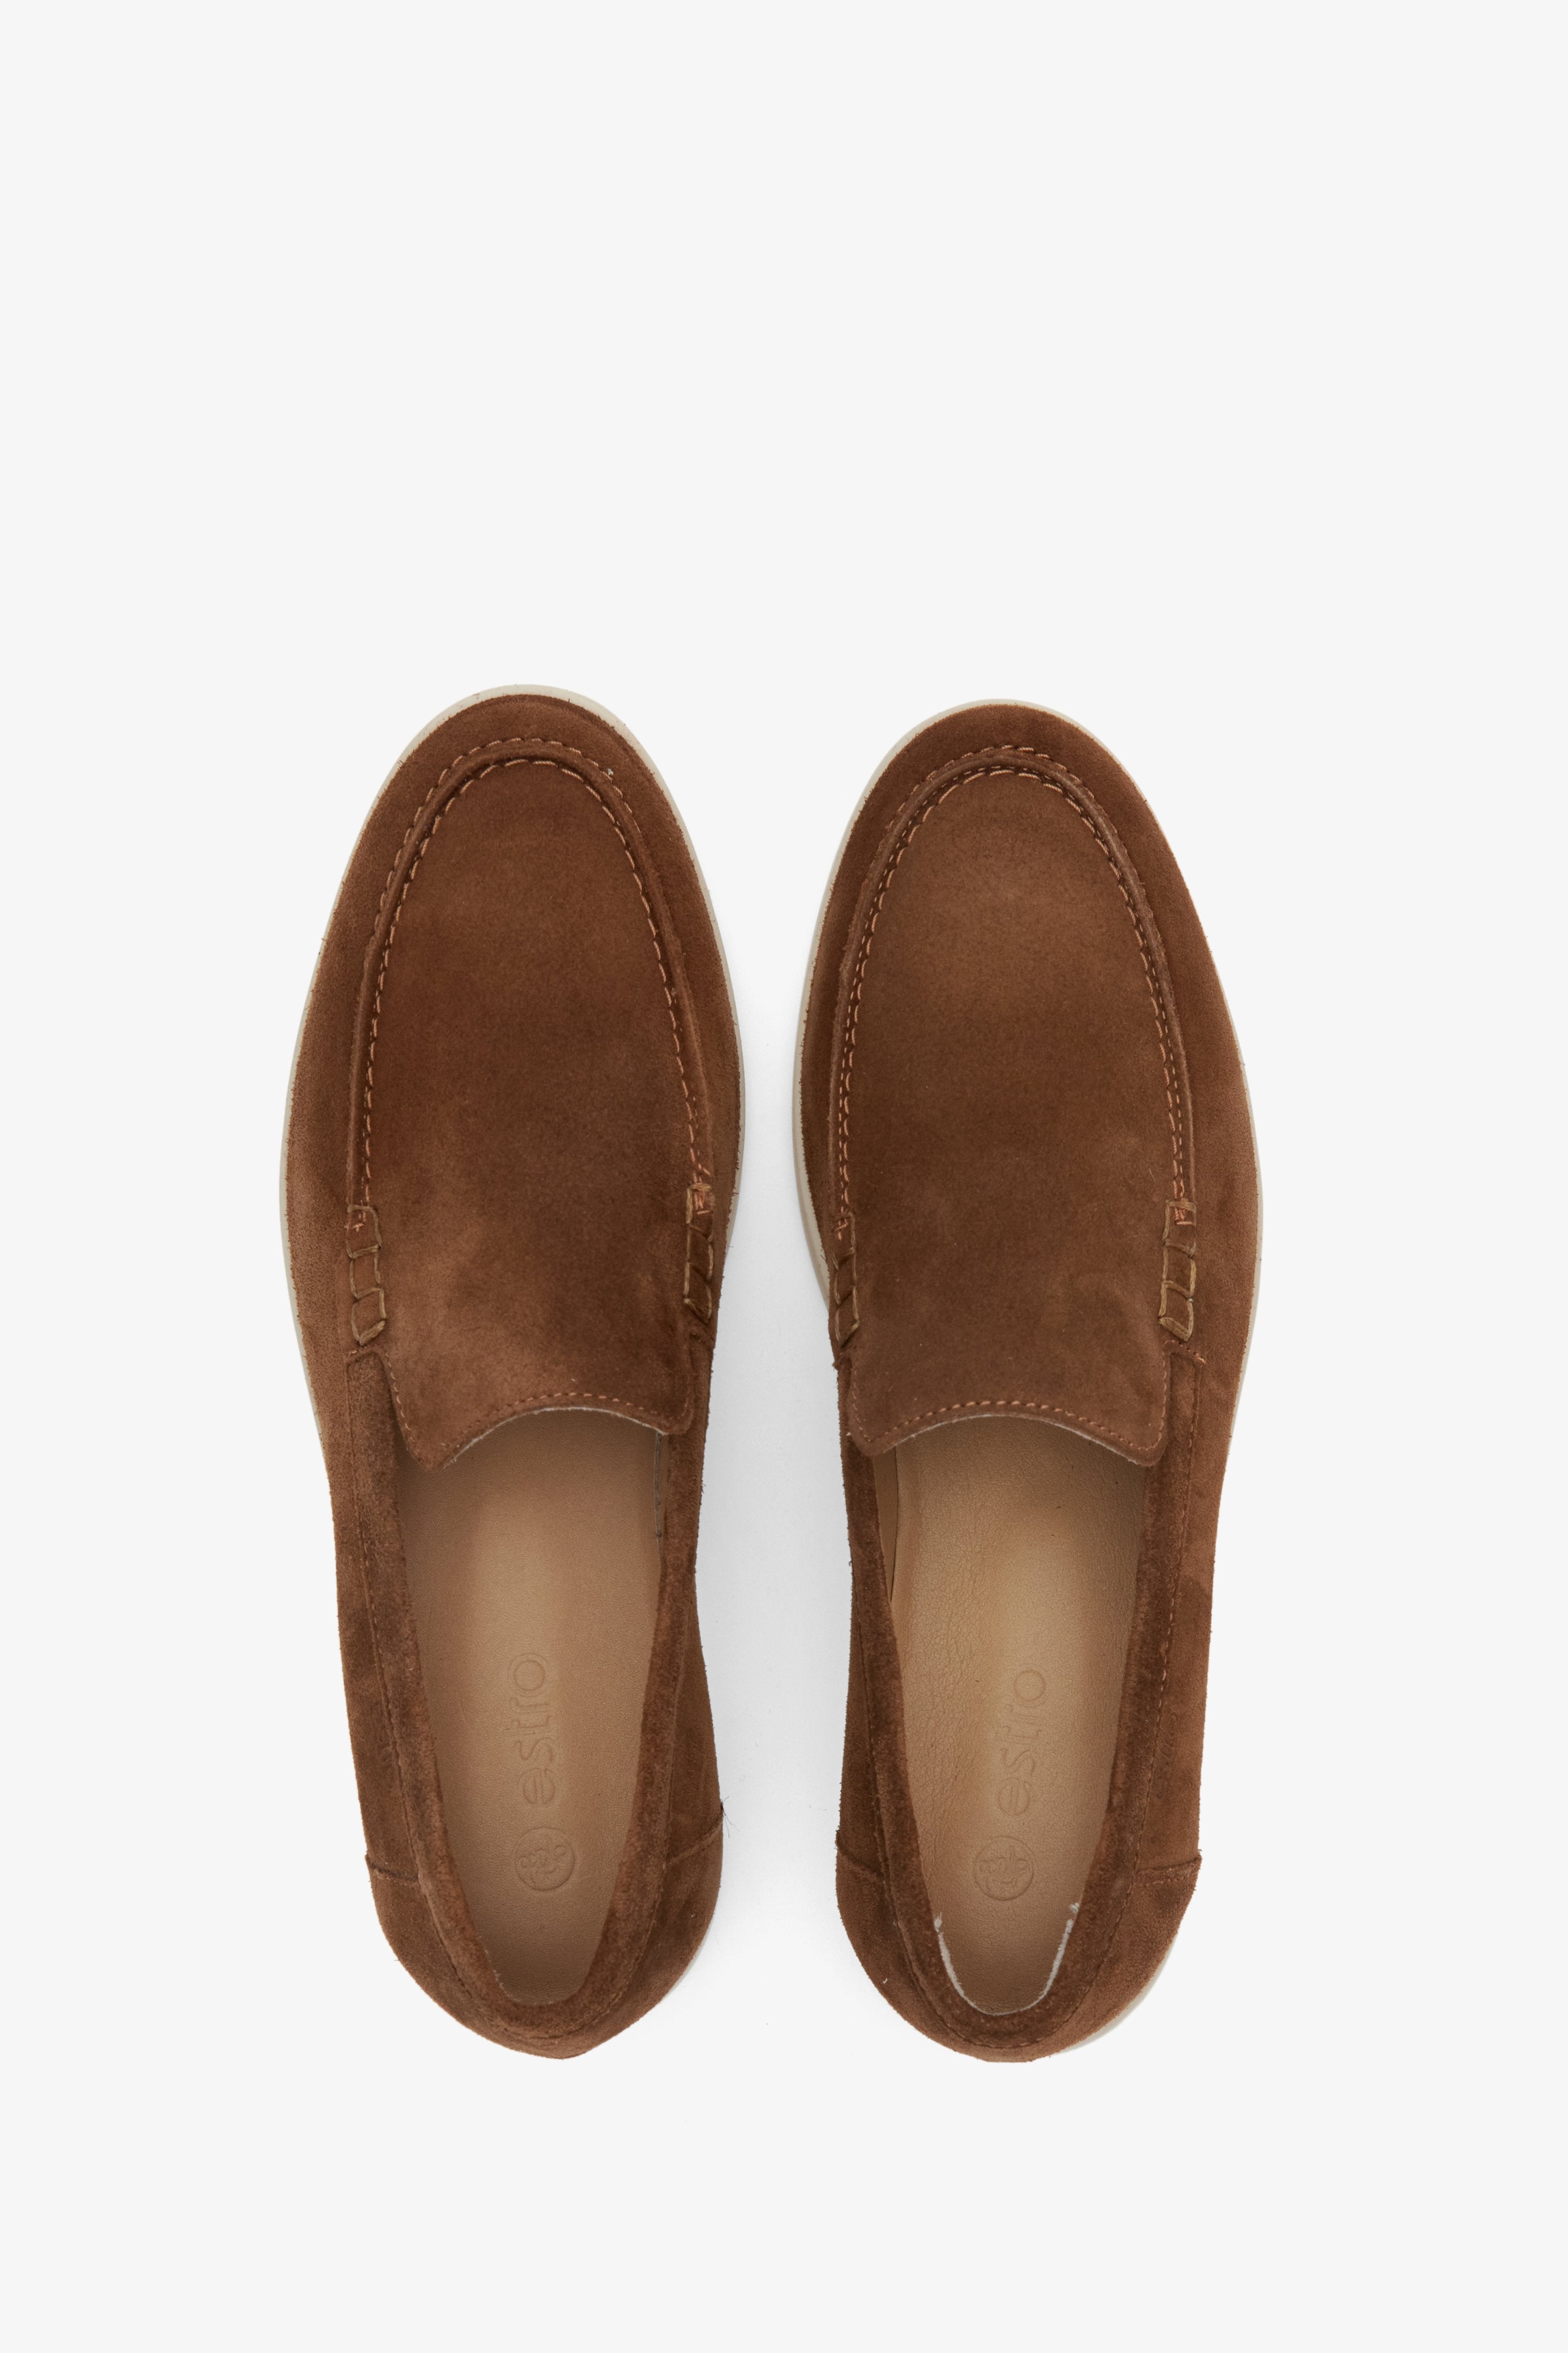 Feminine brown suede loafers - presentation of the footwear from above.